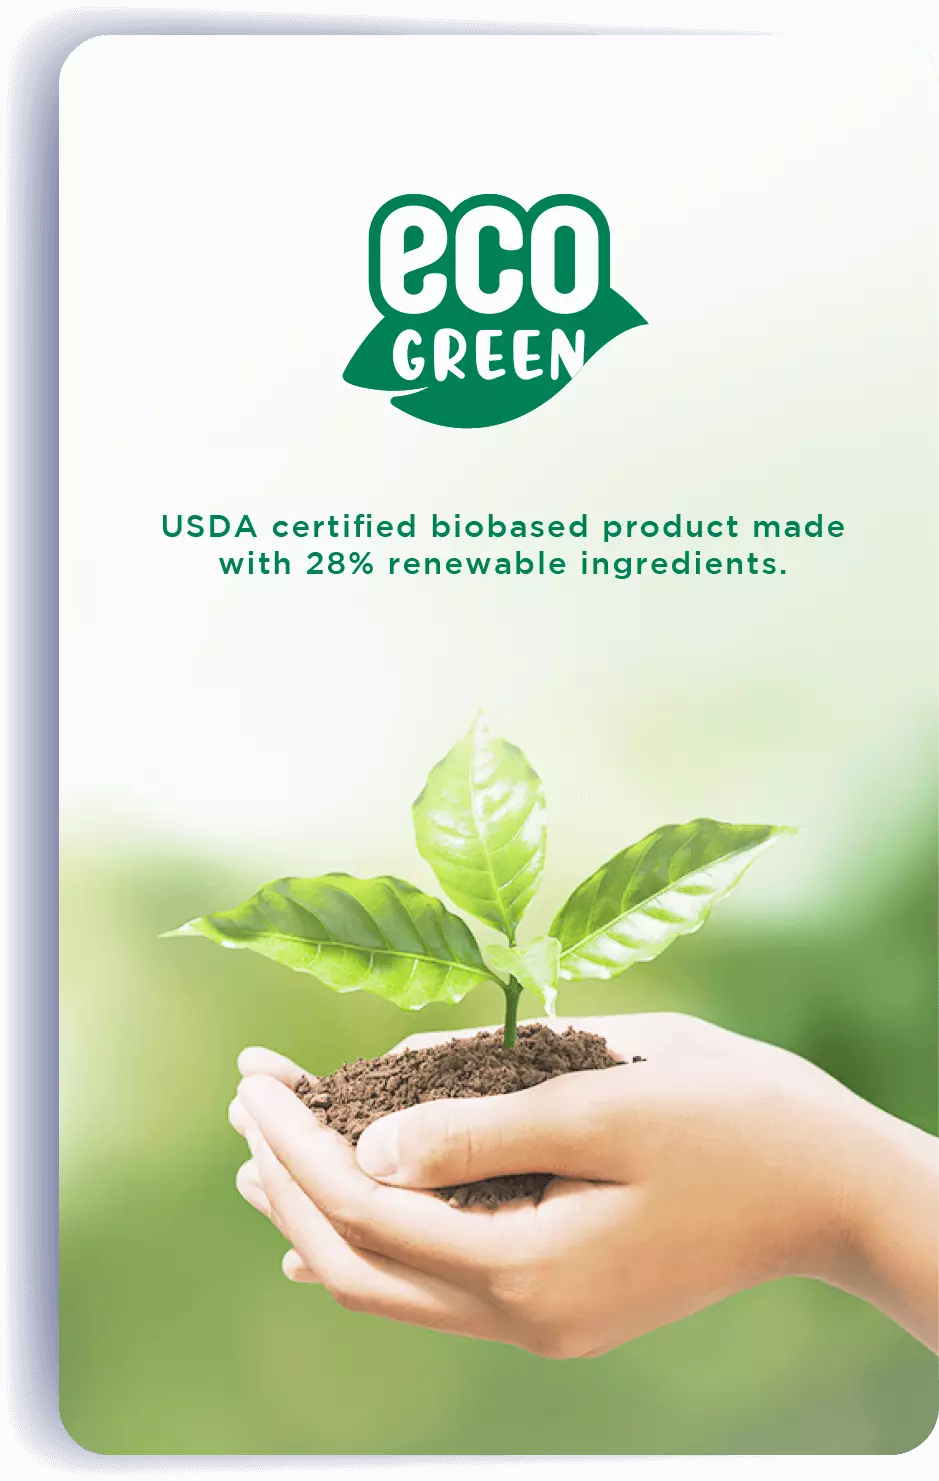 eco GREEN: USDA certified biobased product made with 28% renewable ingredients.